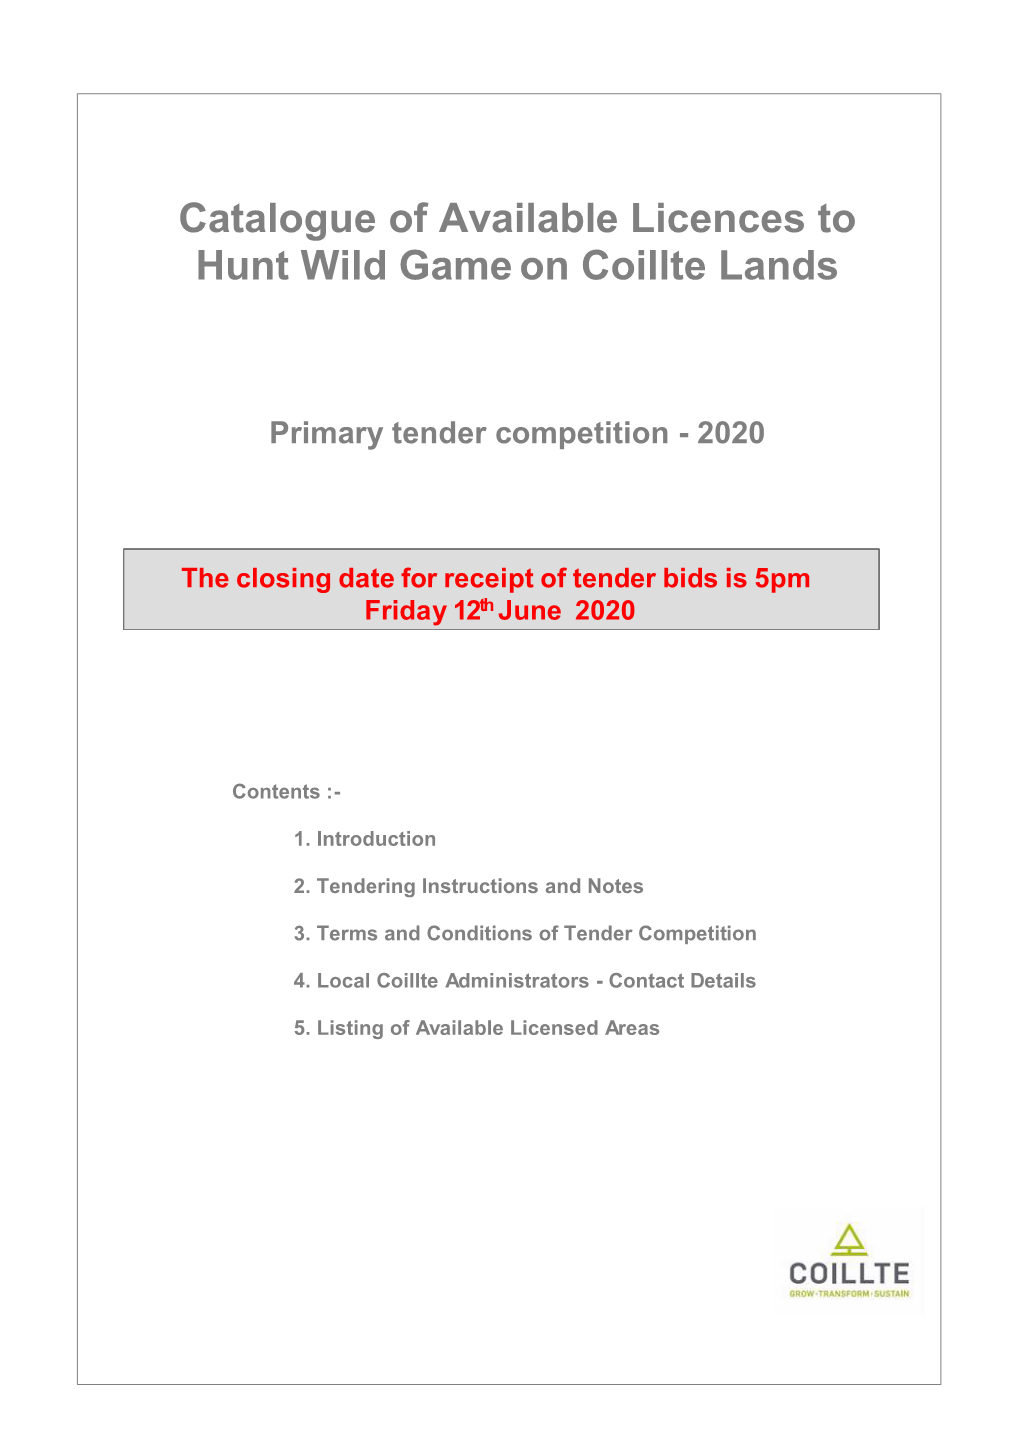 Catalogue of Available Licences to Hunt Wild Game on Coillte Lands